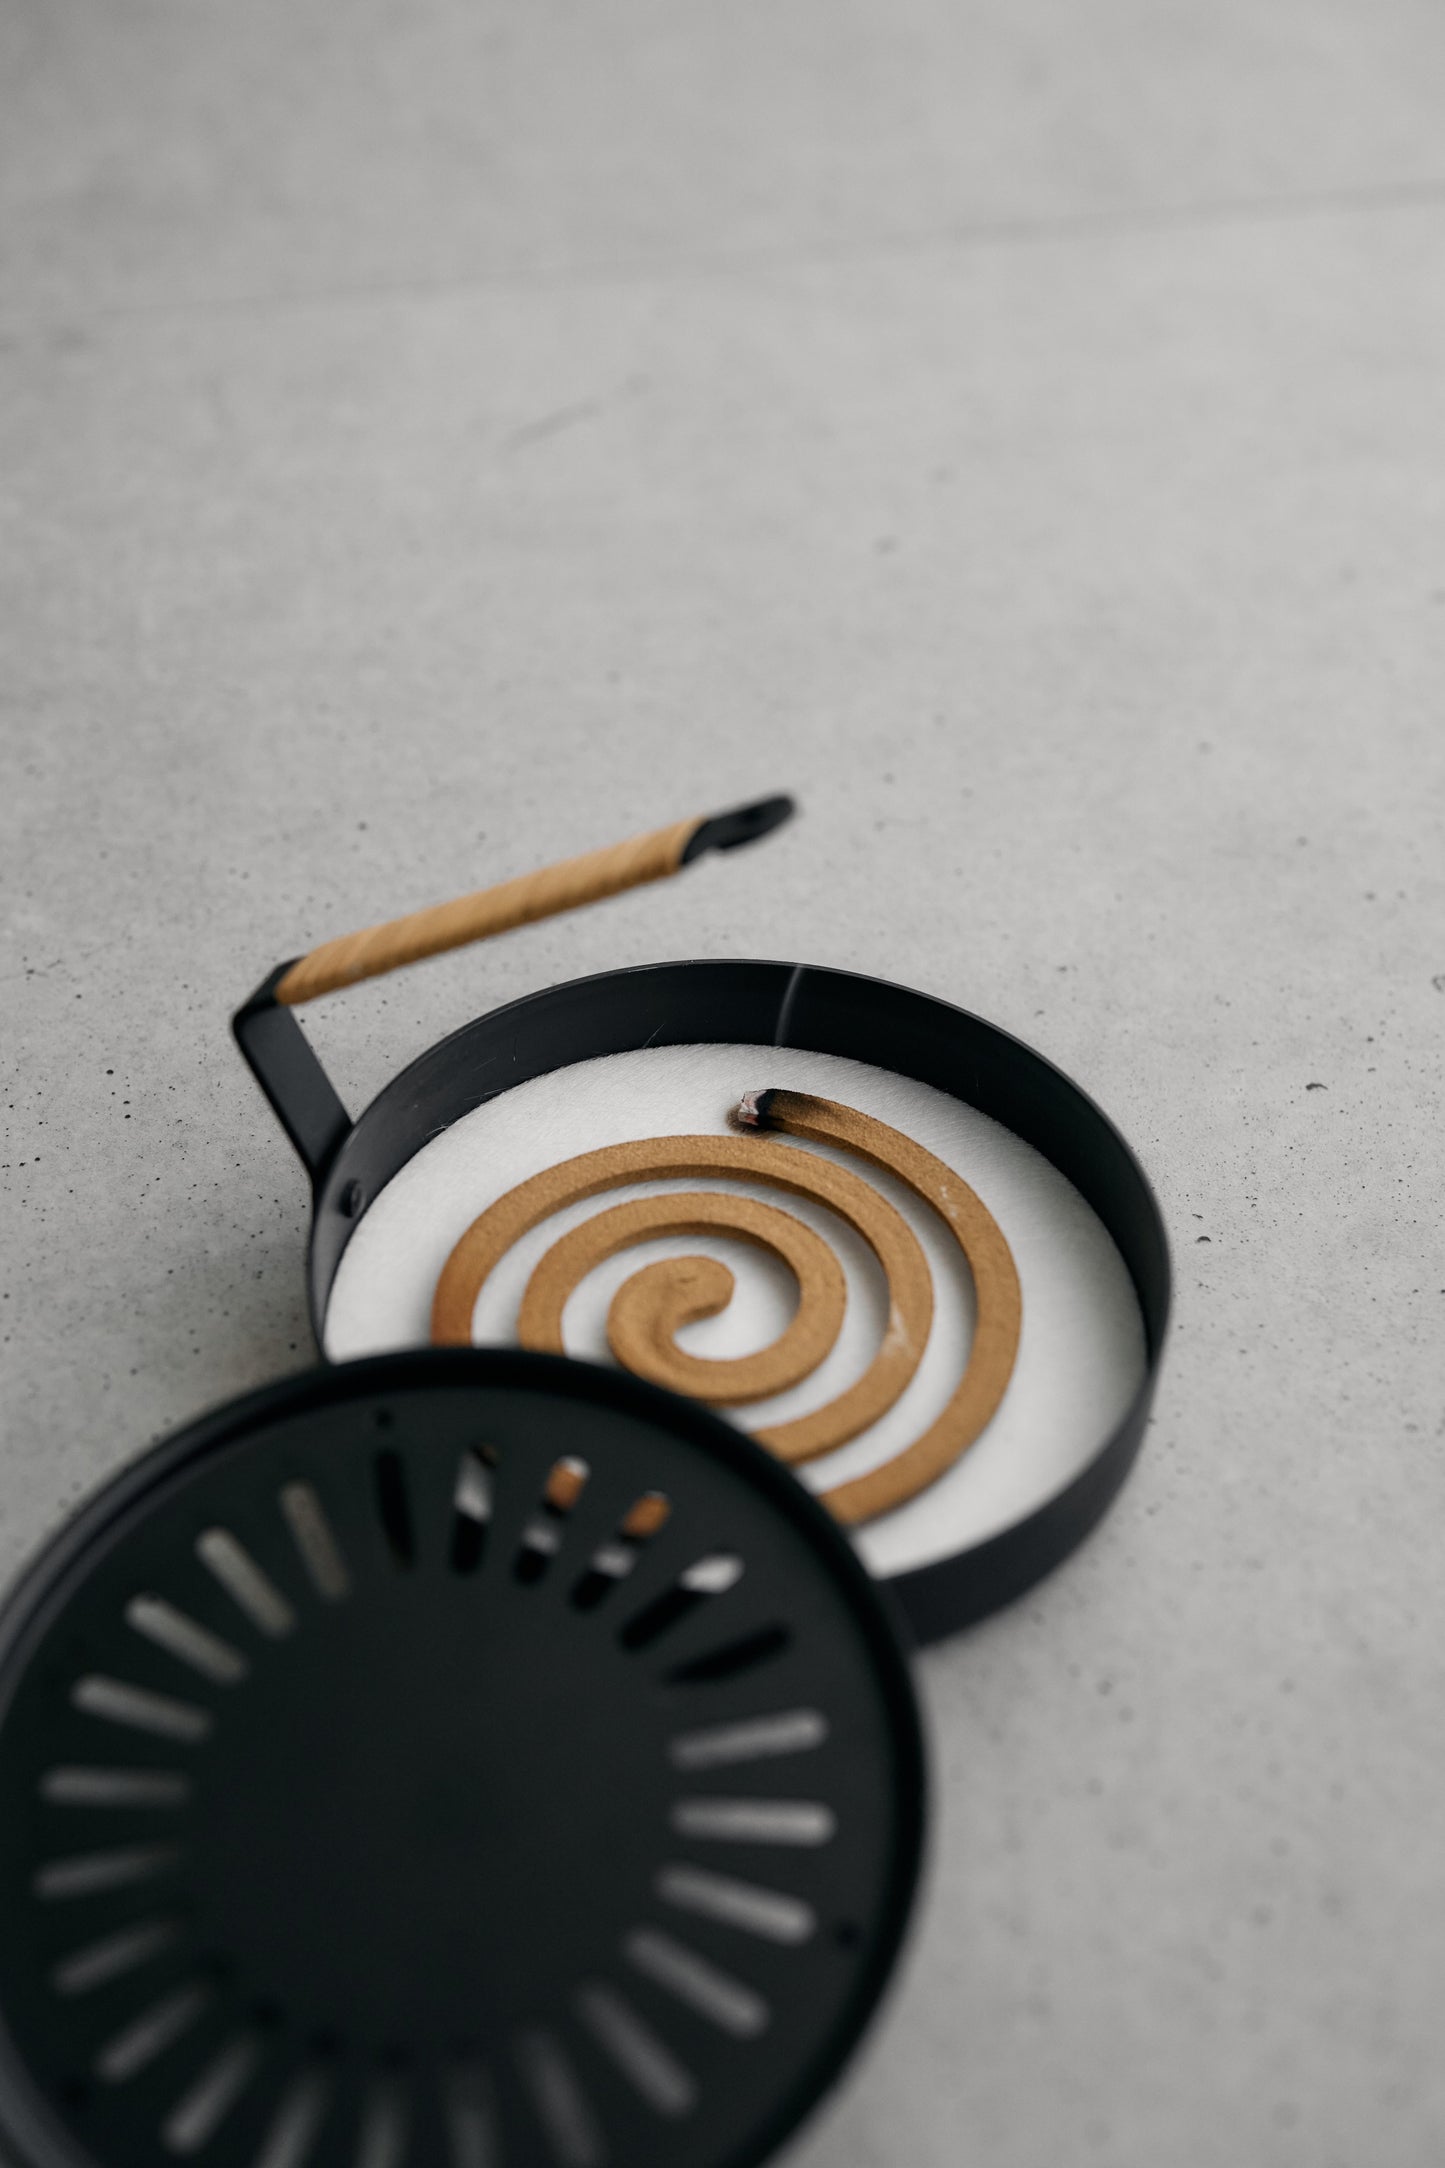 STYLE JAPAN for wanderout/ Mosquito Coil Holder “Kayari”